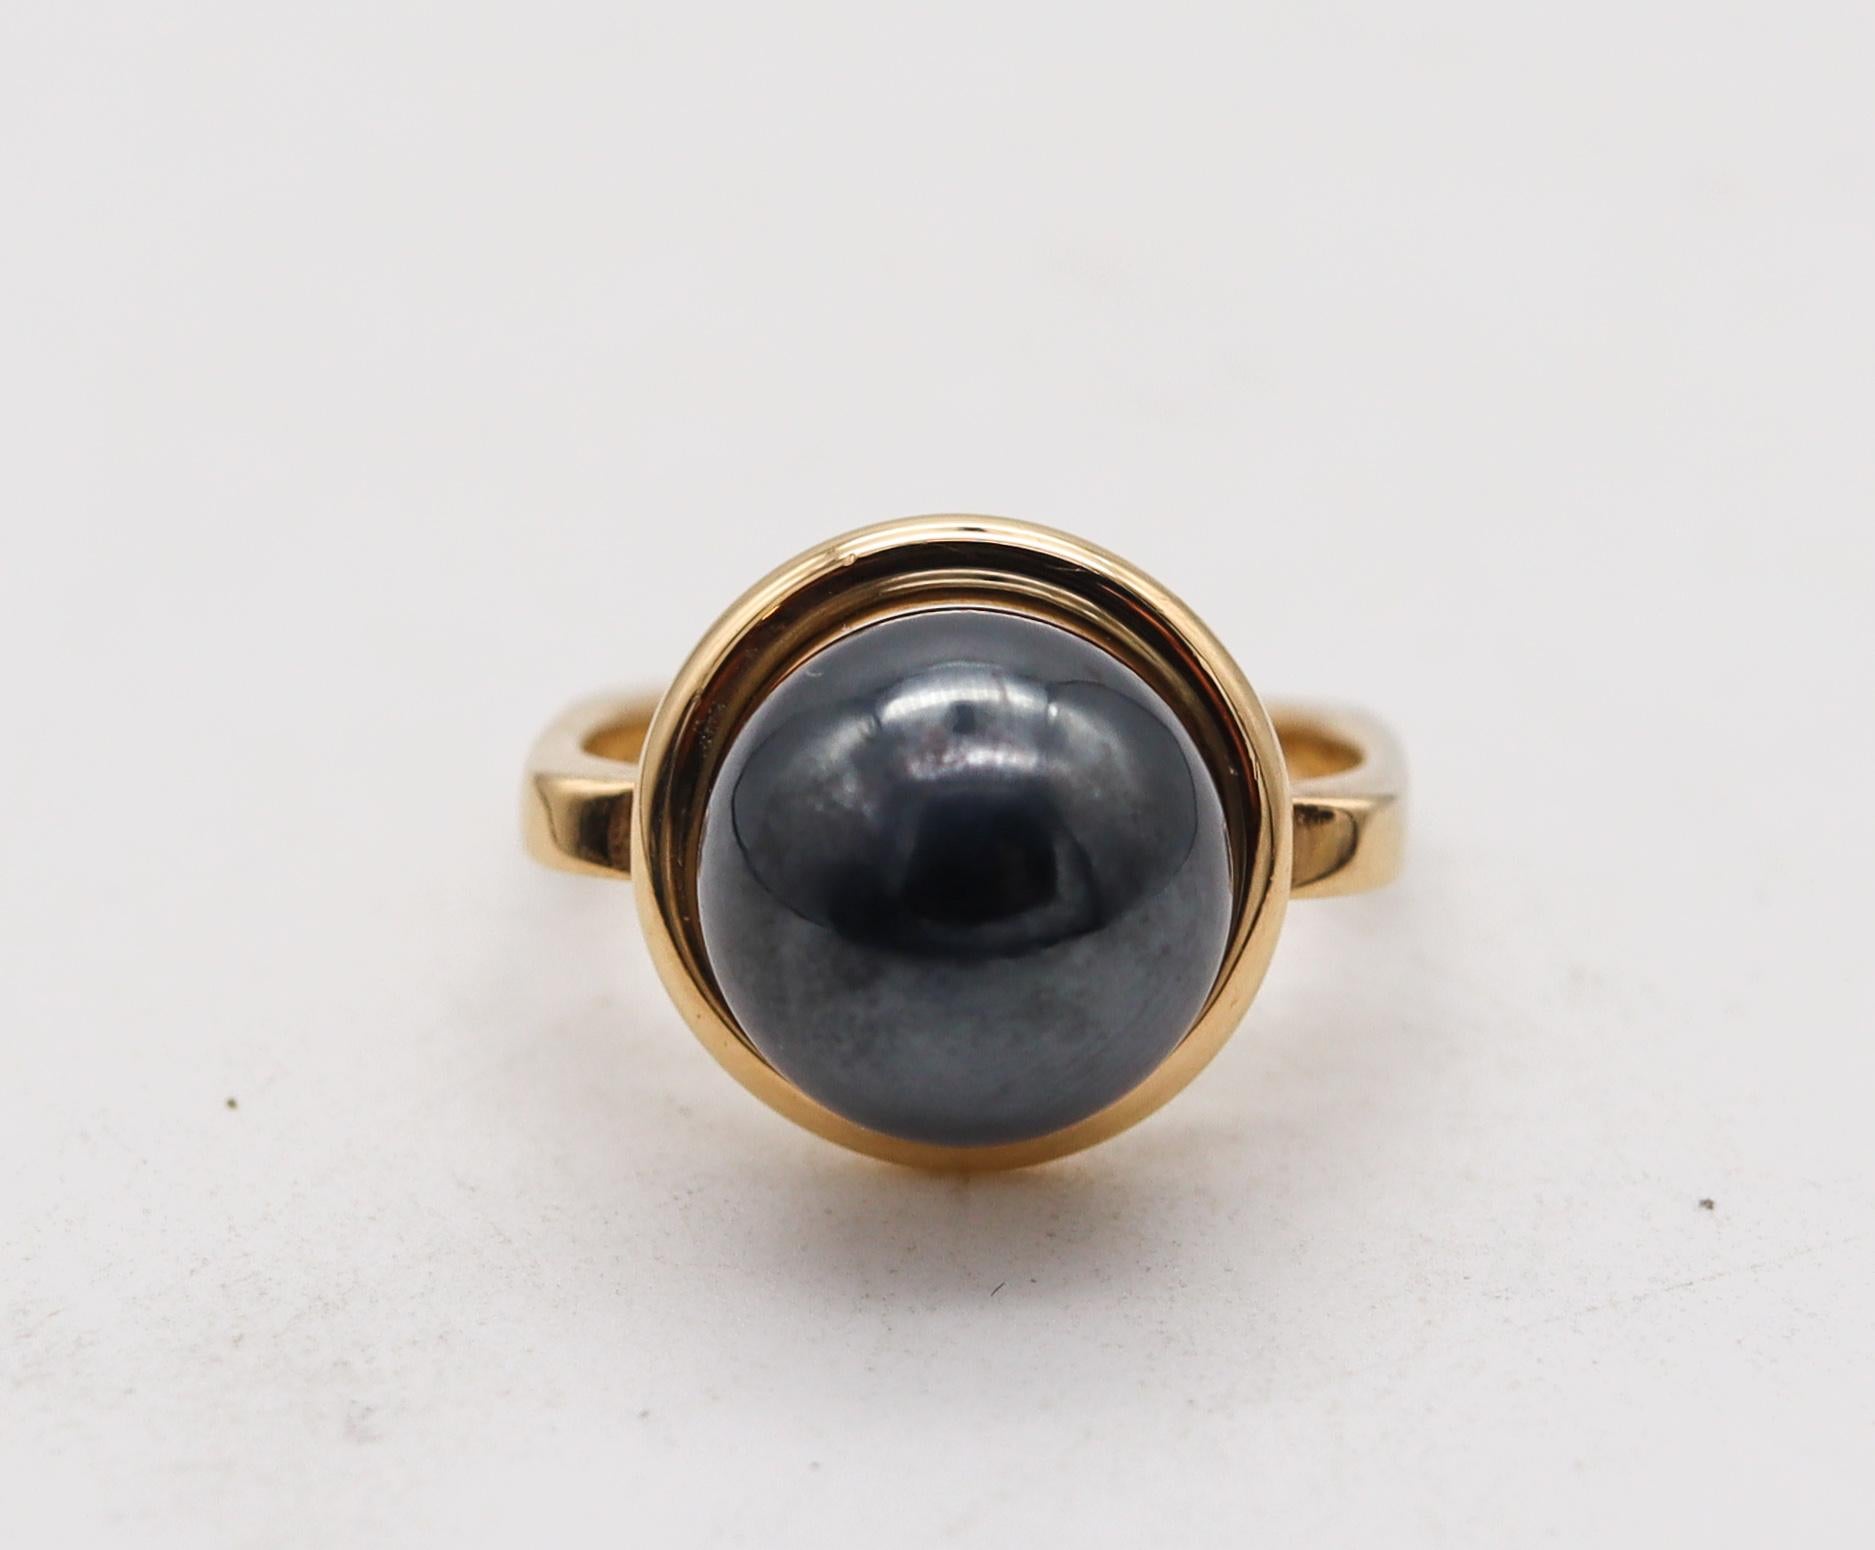 Modernist Dinh Van Paris 1970 Geometric Ring 18Kt Yellow Gold with Carved Hematite Sphere For Sale